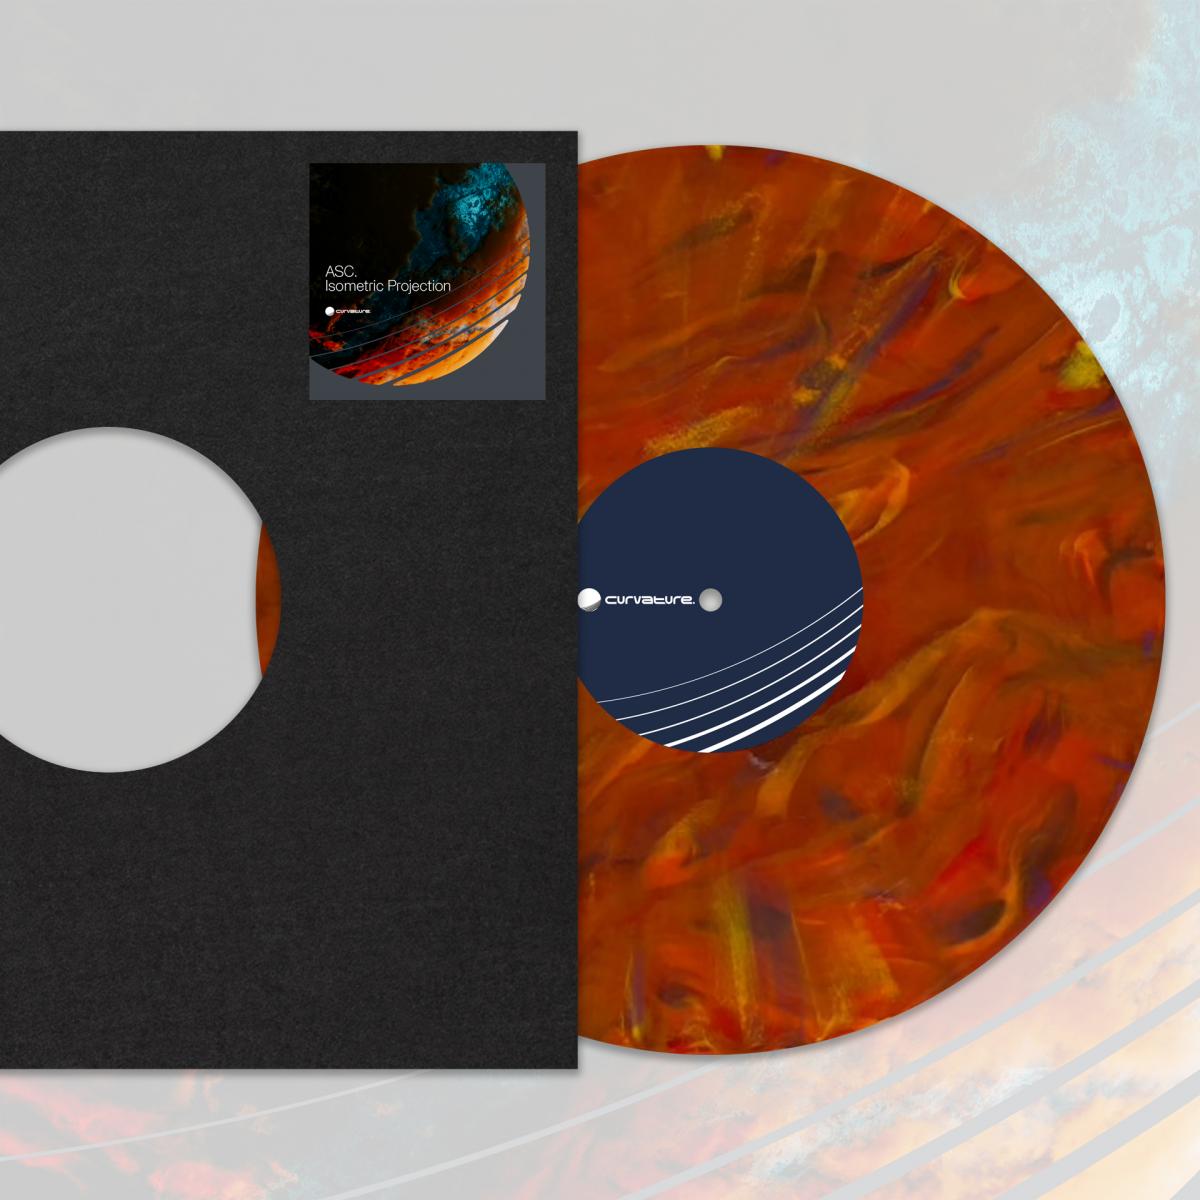 *PRE-ORDER* ASC 'Isometric Projection' 12" [Orange Marbled Wax]